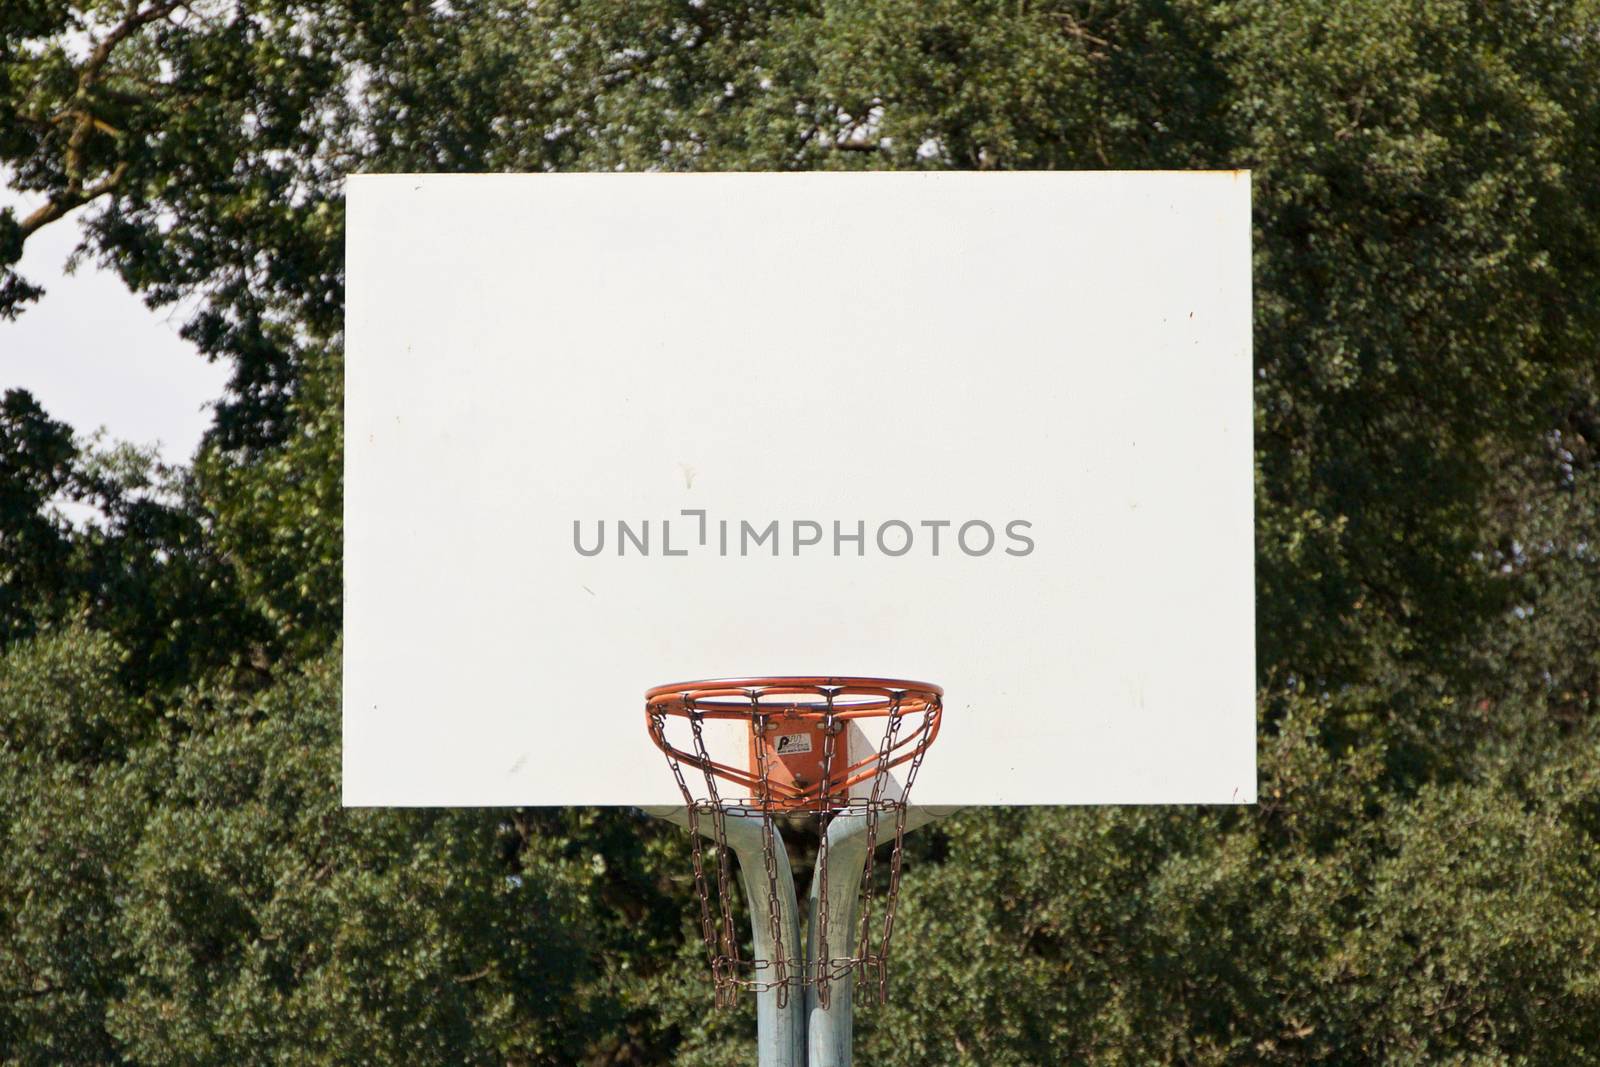 Basketball Hoop With White Backboard by jhlemmer